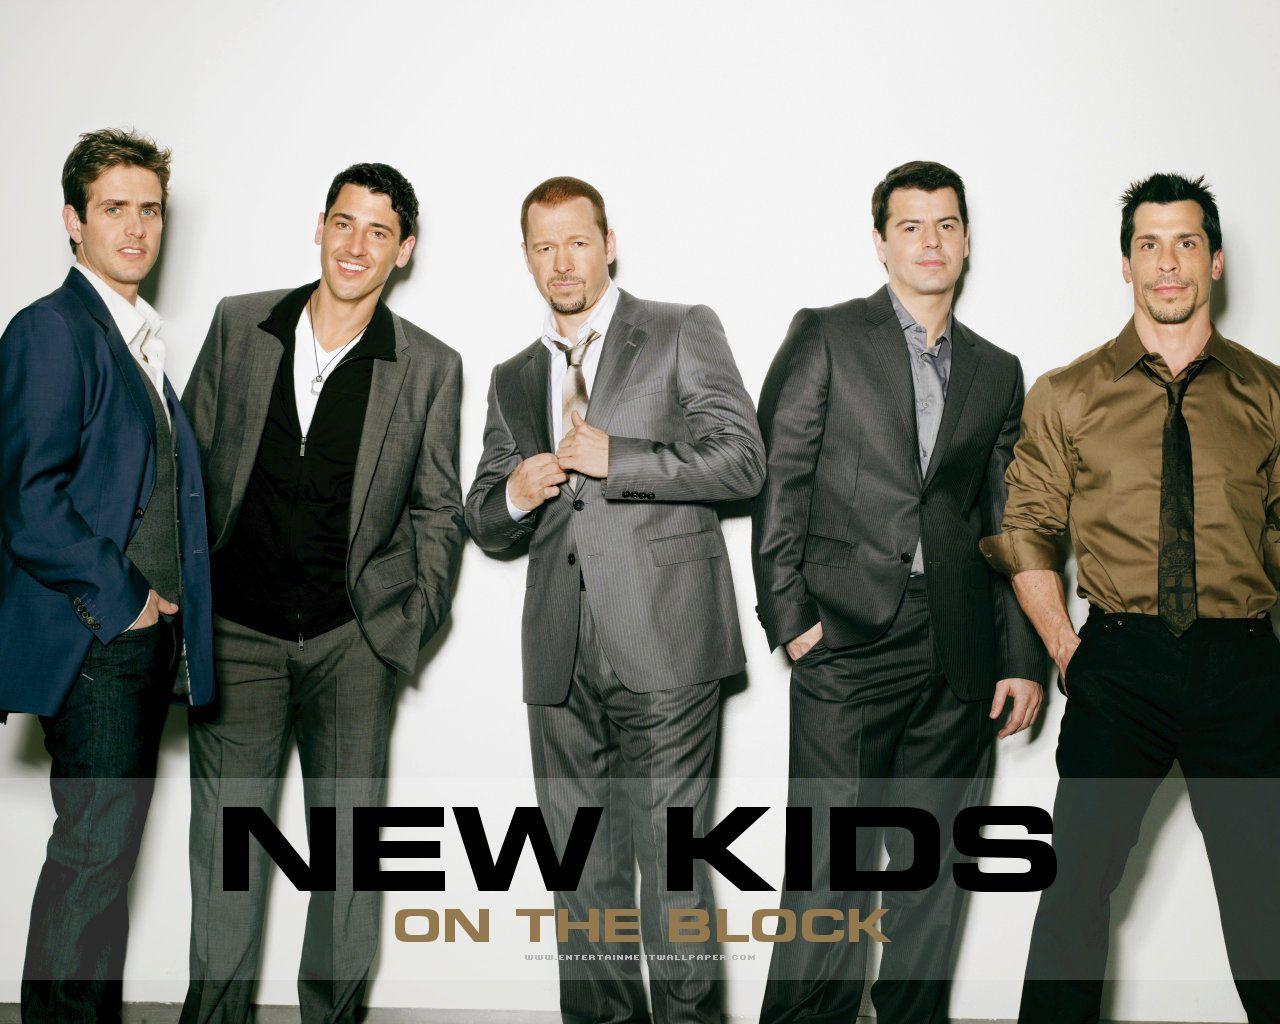 New Kids On The Block Wallpaper. Discounted New Kids On The Block